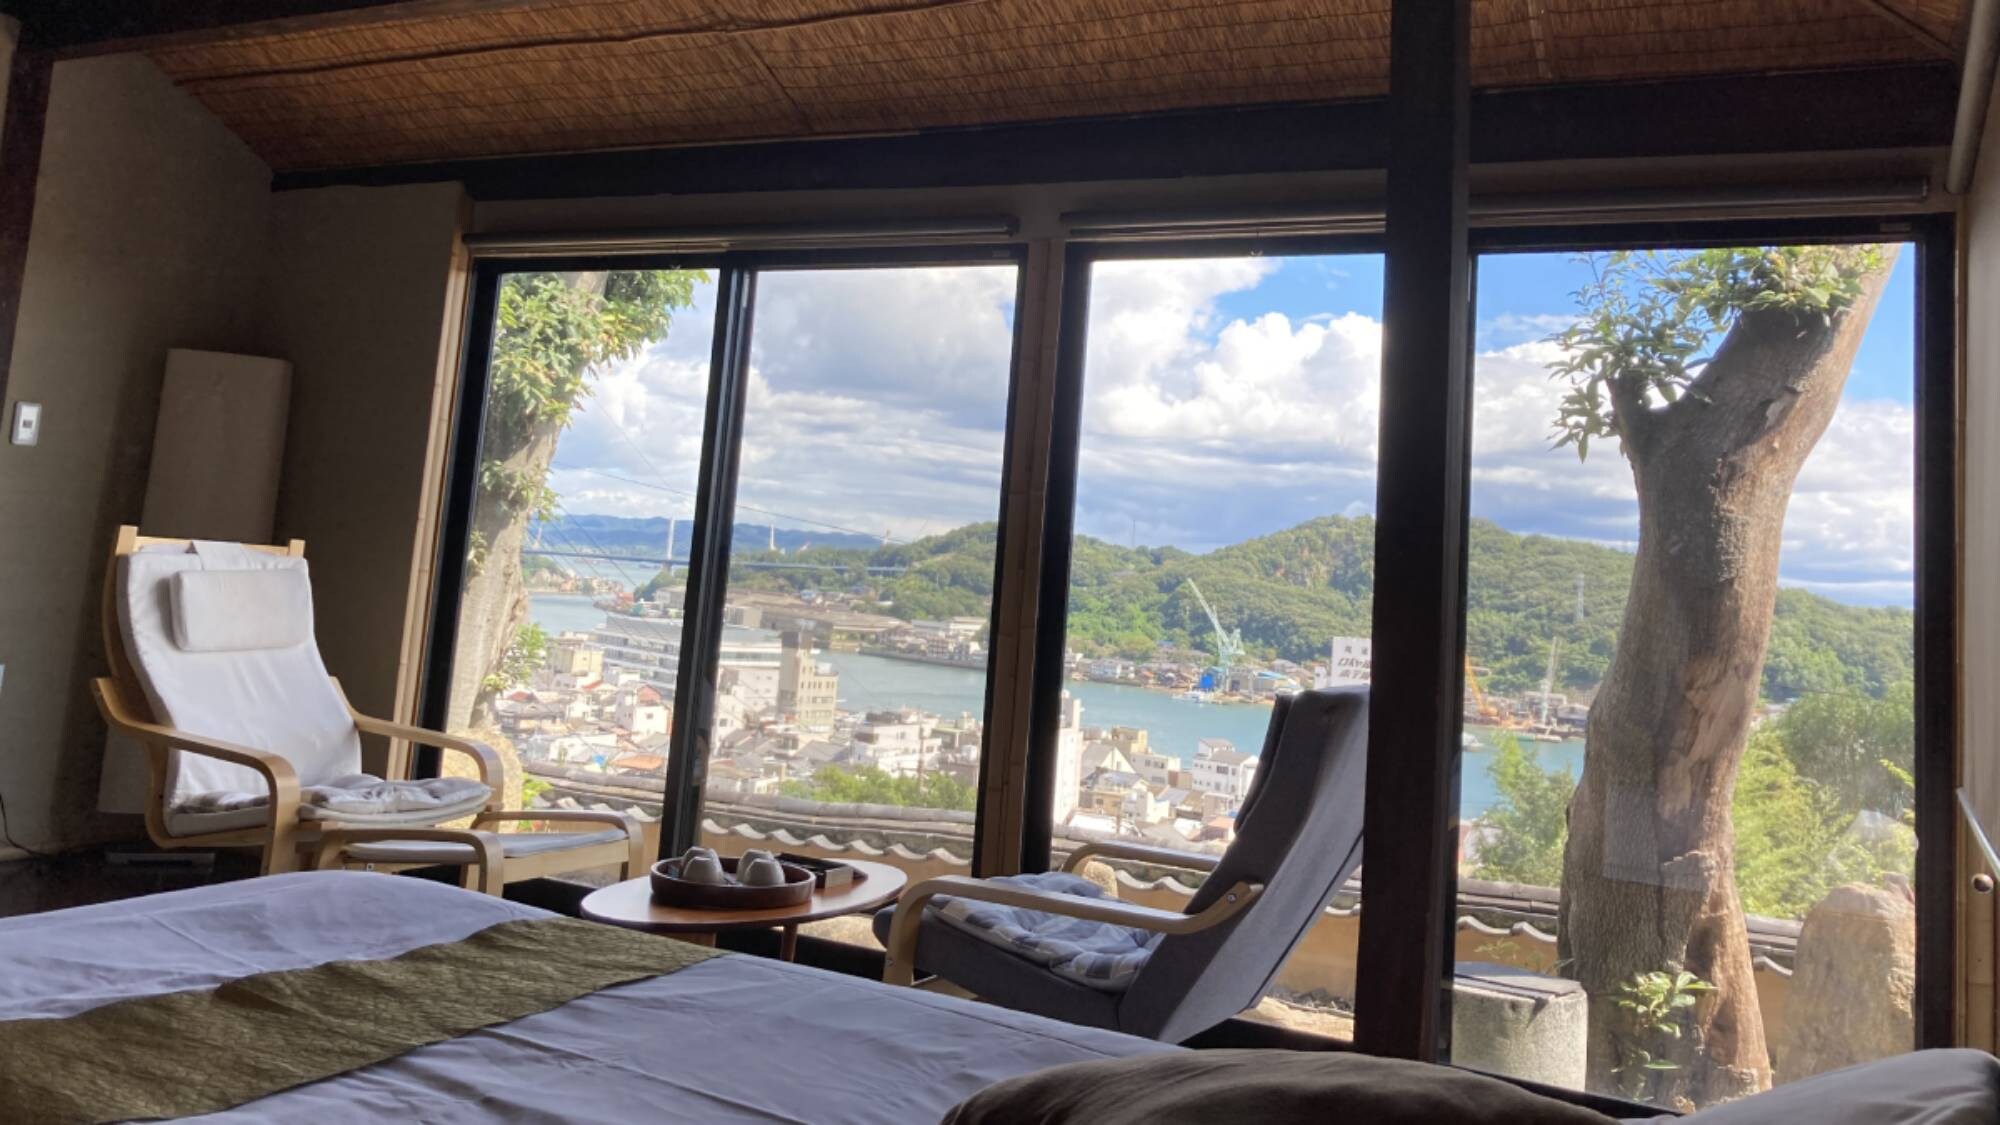 ・ Location overlooking Onomichi from the room